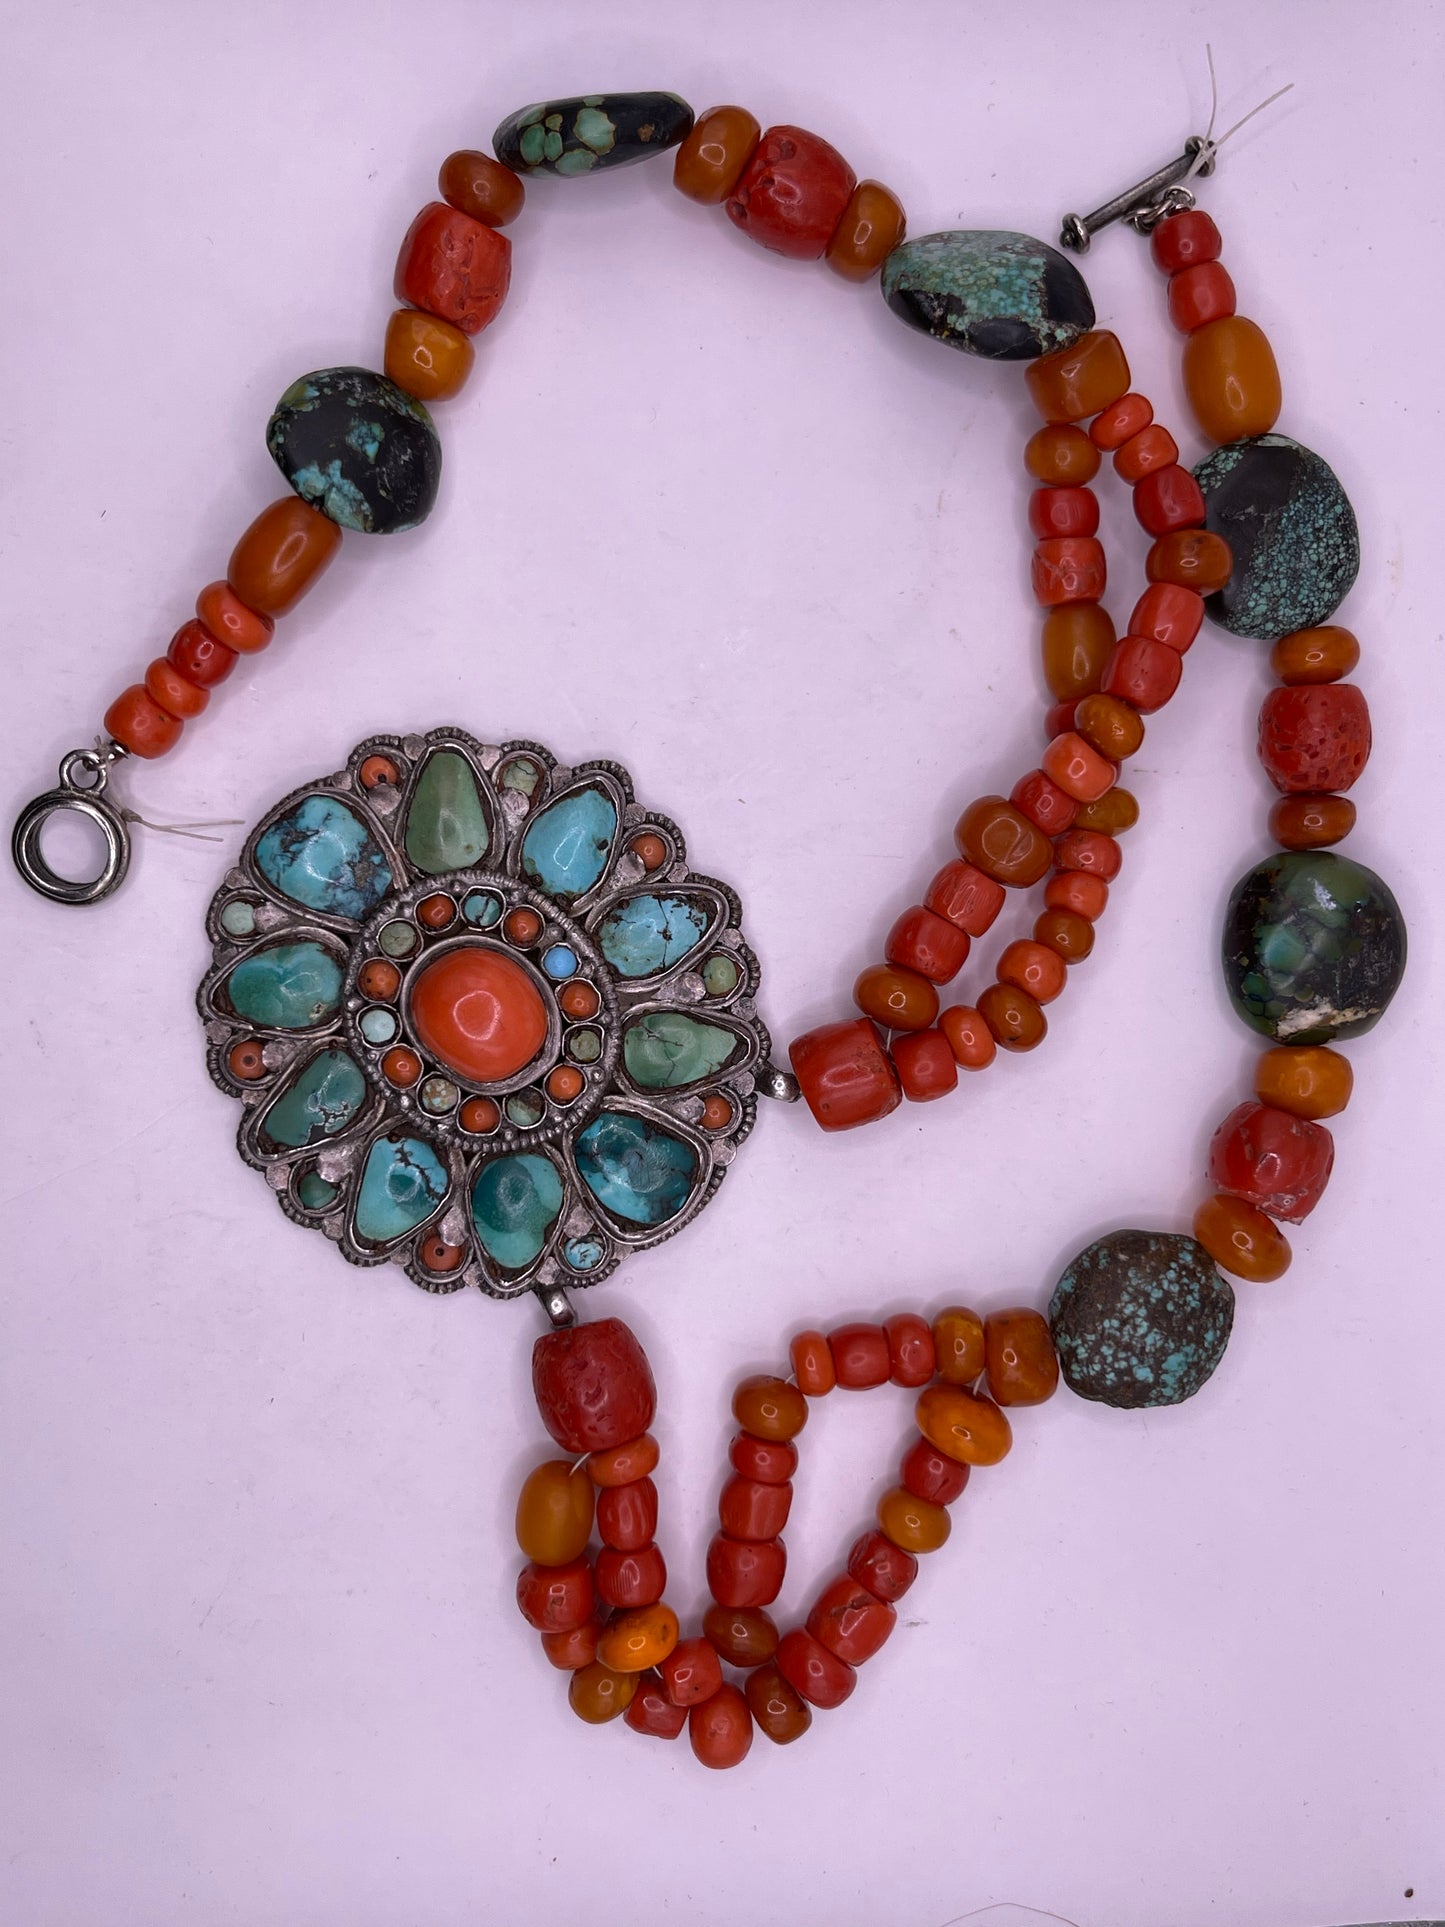 Coral, amber and turquoise necklace with a turquoise and coral silver pendant